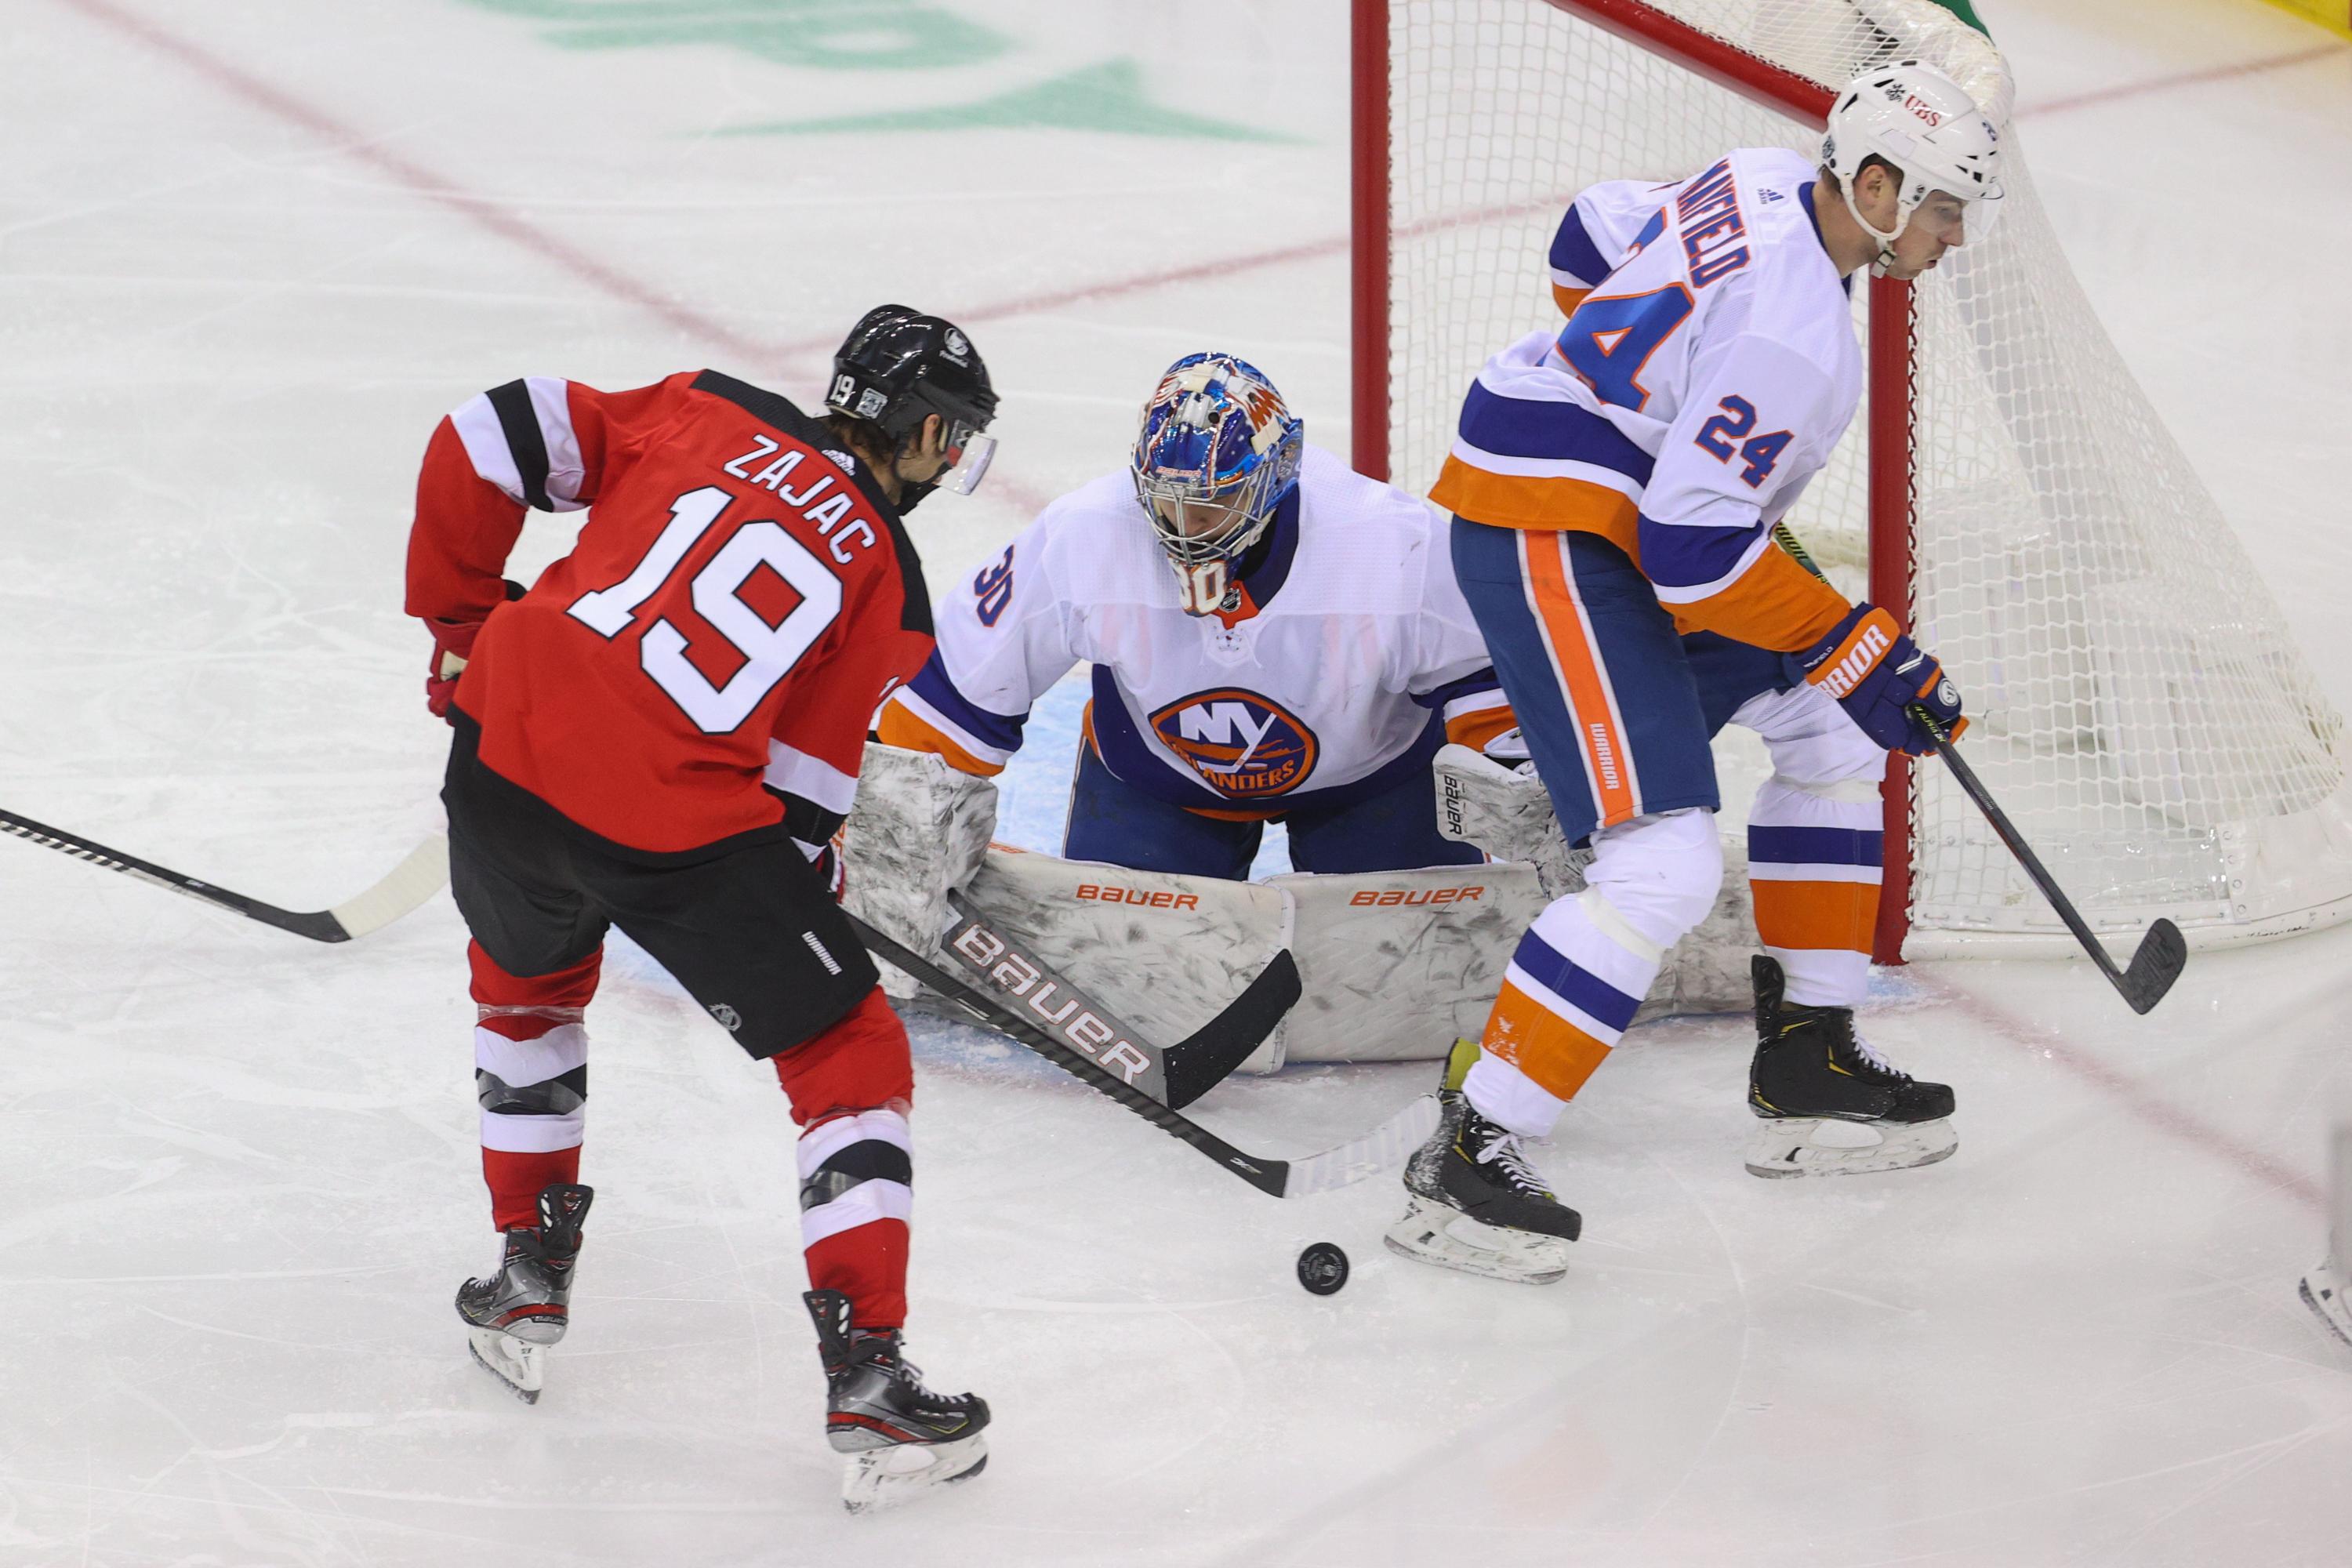 Jan 24, 2021; Newark, New Jersey, USA; New Jersey Devils center Travis Zajac (19) plays the puck in front of New York Islanders goaltender Ilya Sorokin (30) during the second period at Prudential Center. Mandatory Credit: Ed Mulholland-USA TODAY Sports / © Ed Mulholland-USA TODAY Sports